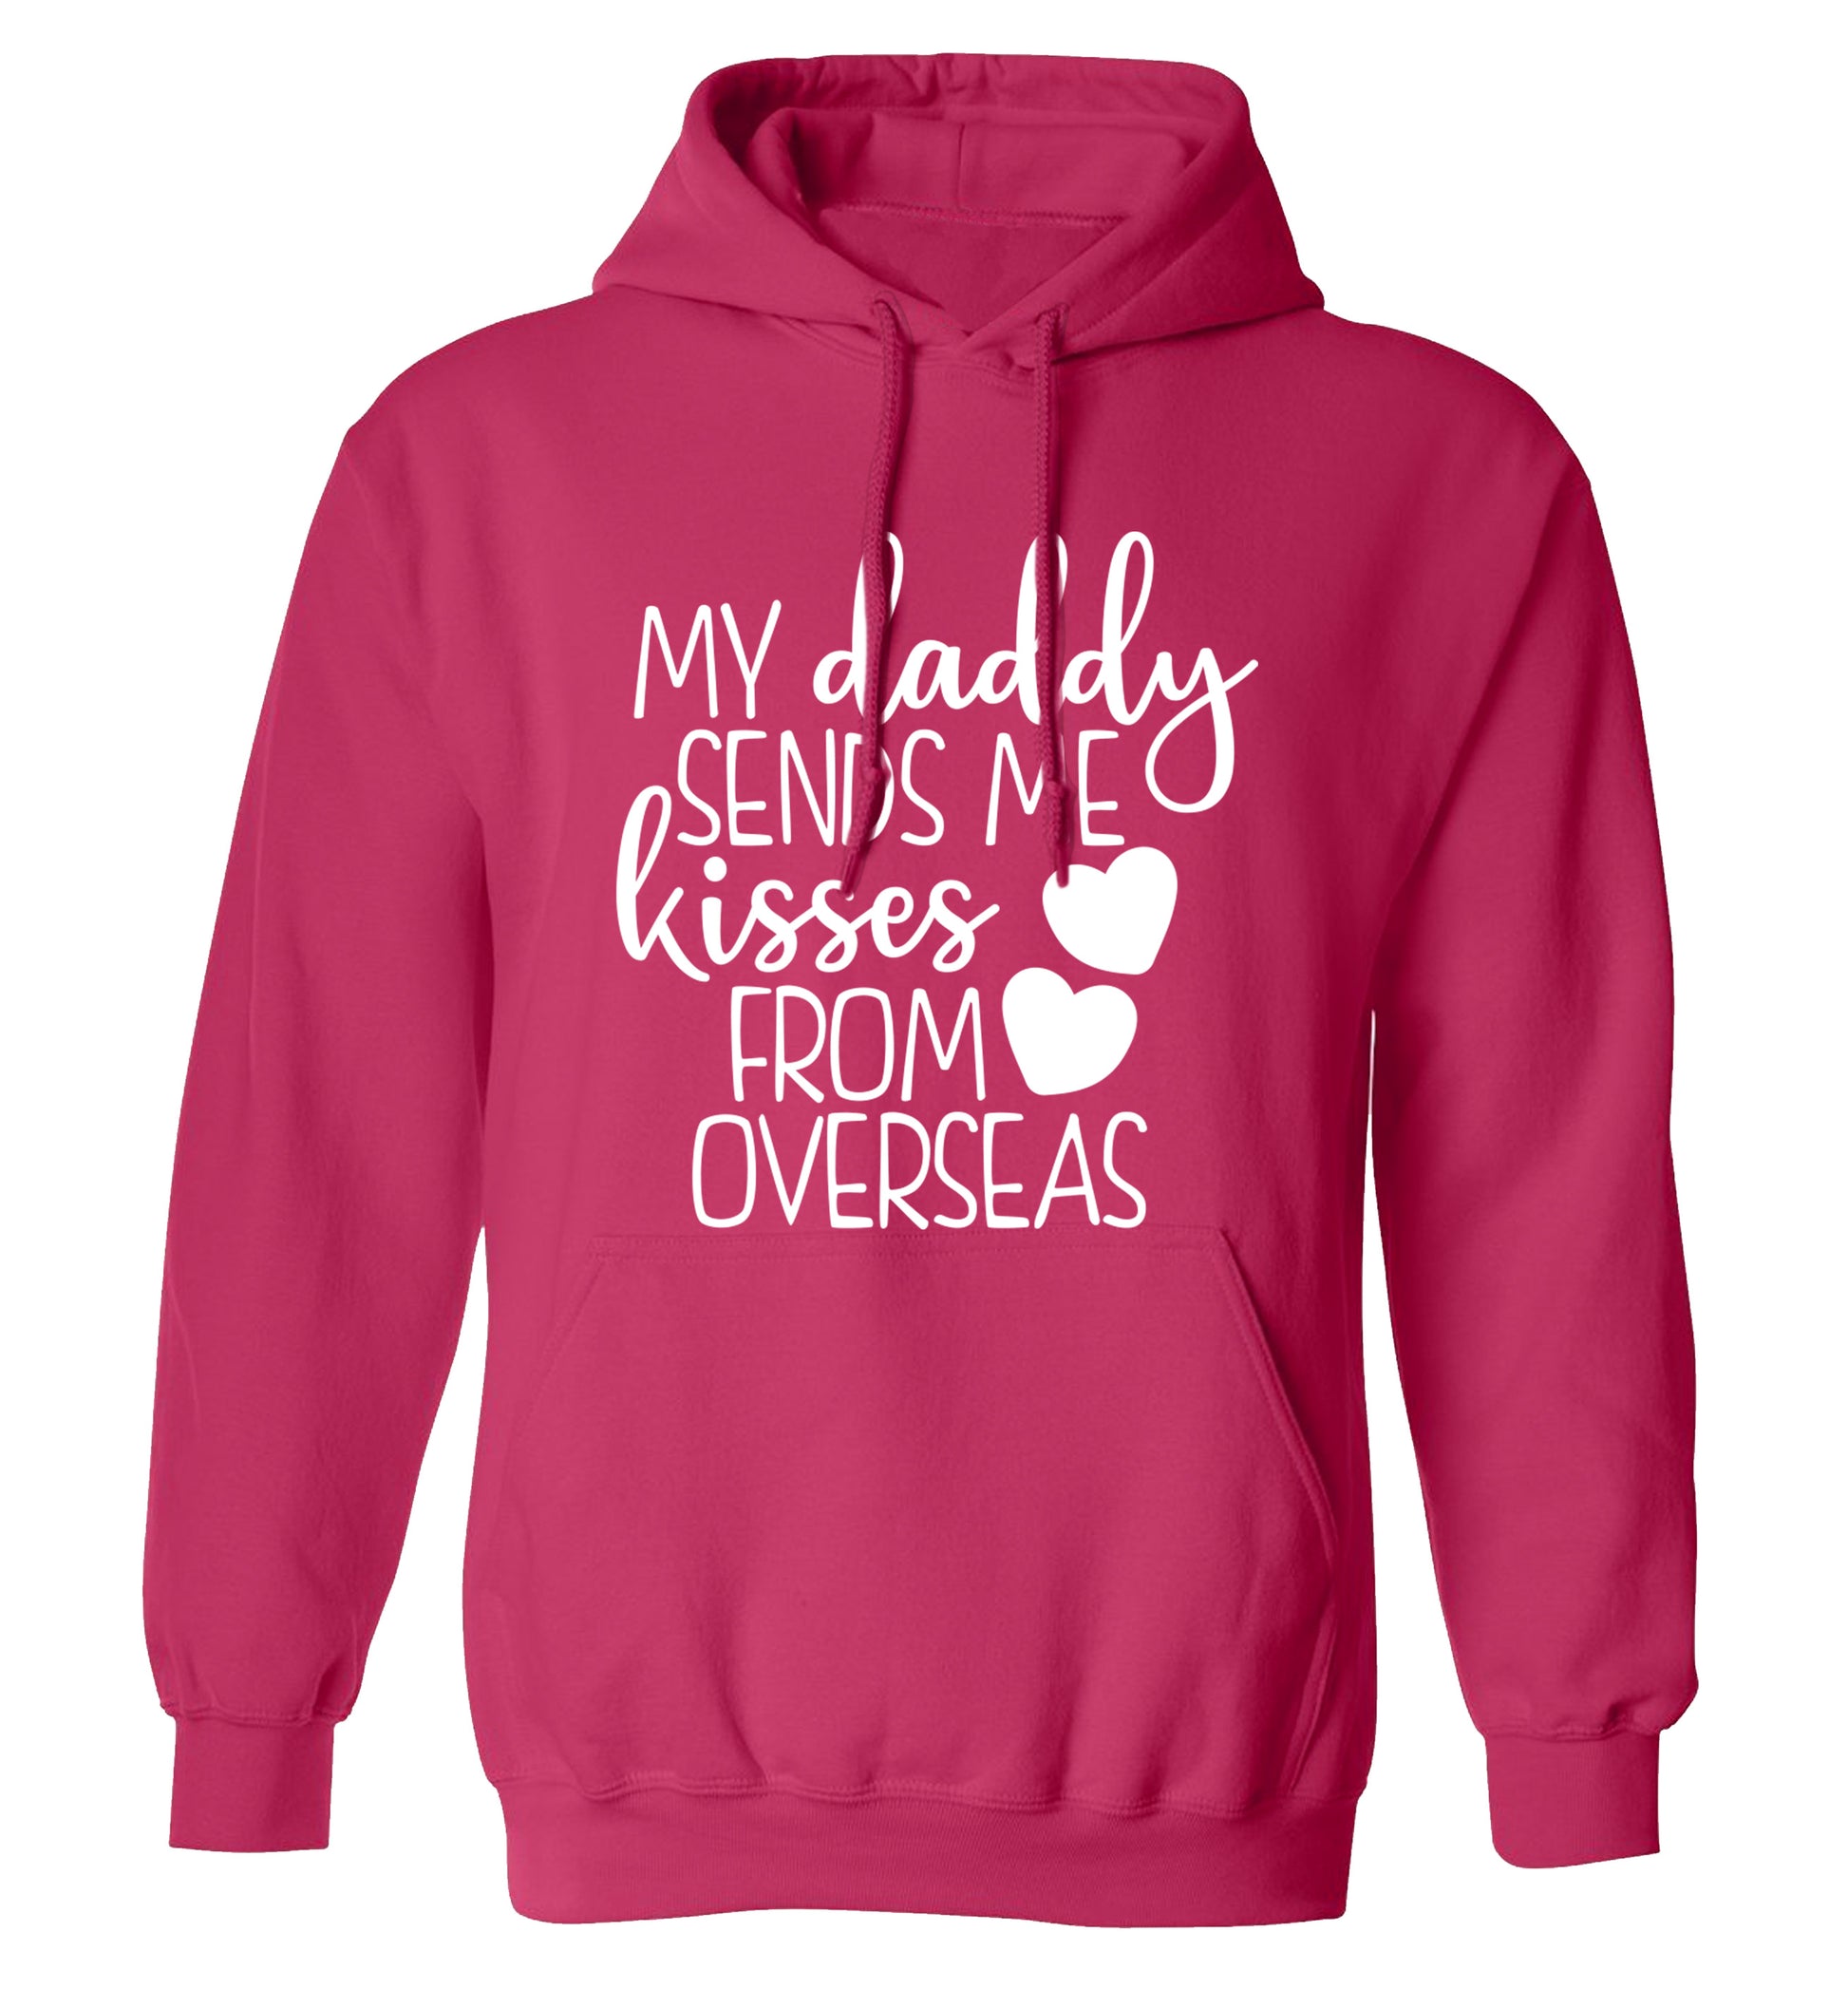 My daddy sends me kisses from overseas adults unisex pink hoodie 2XL